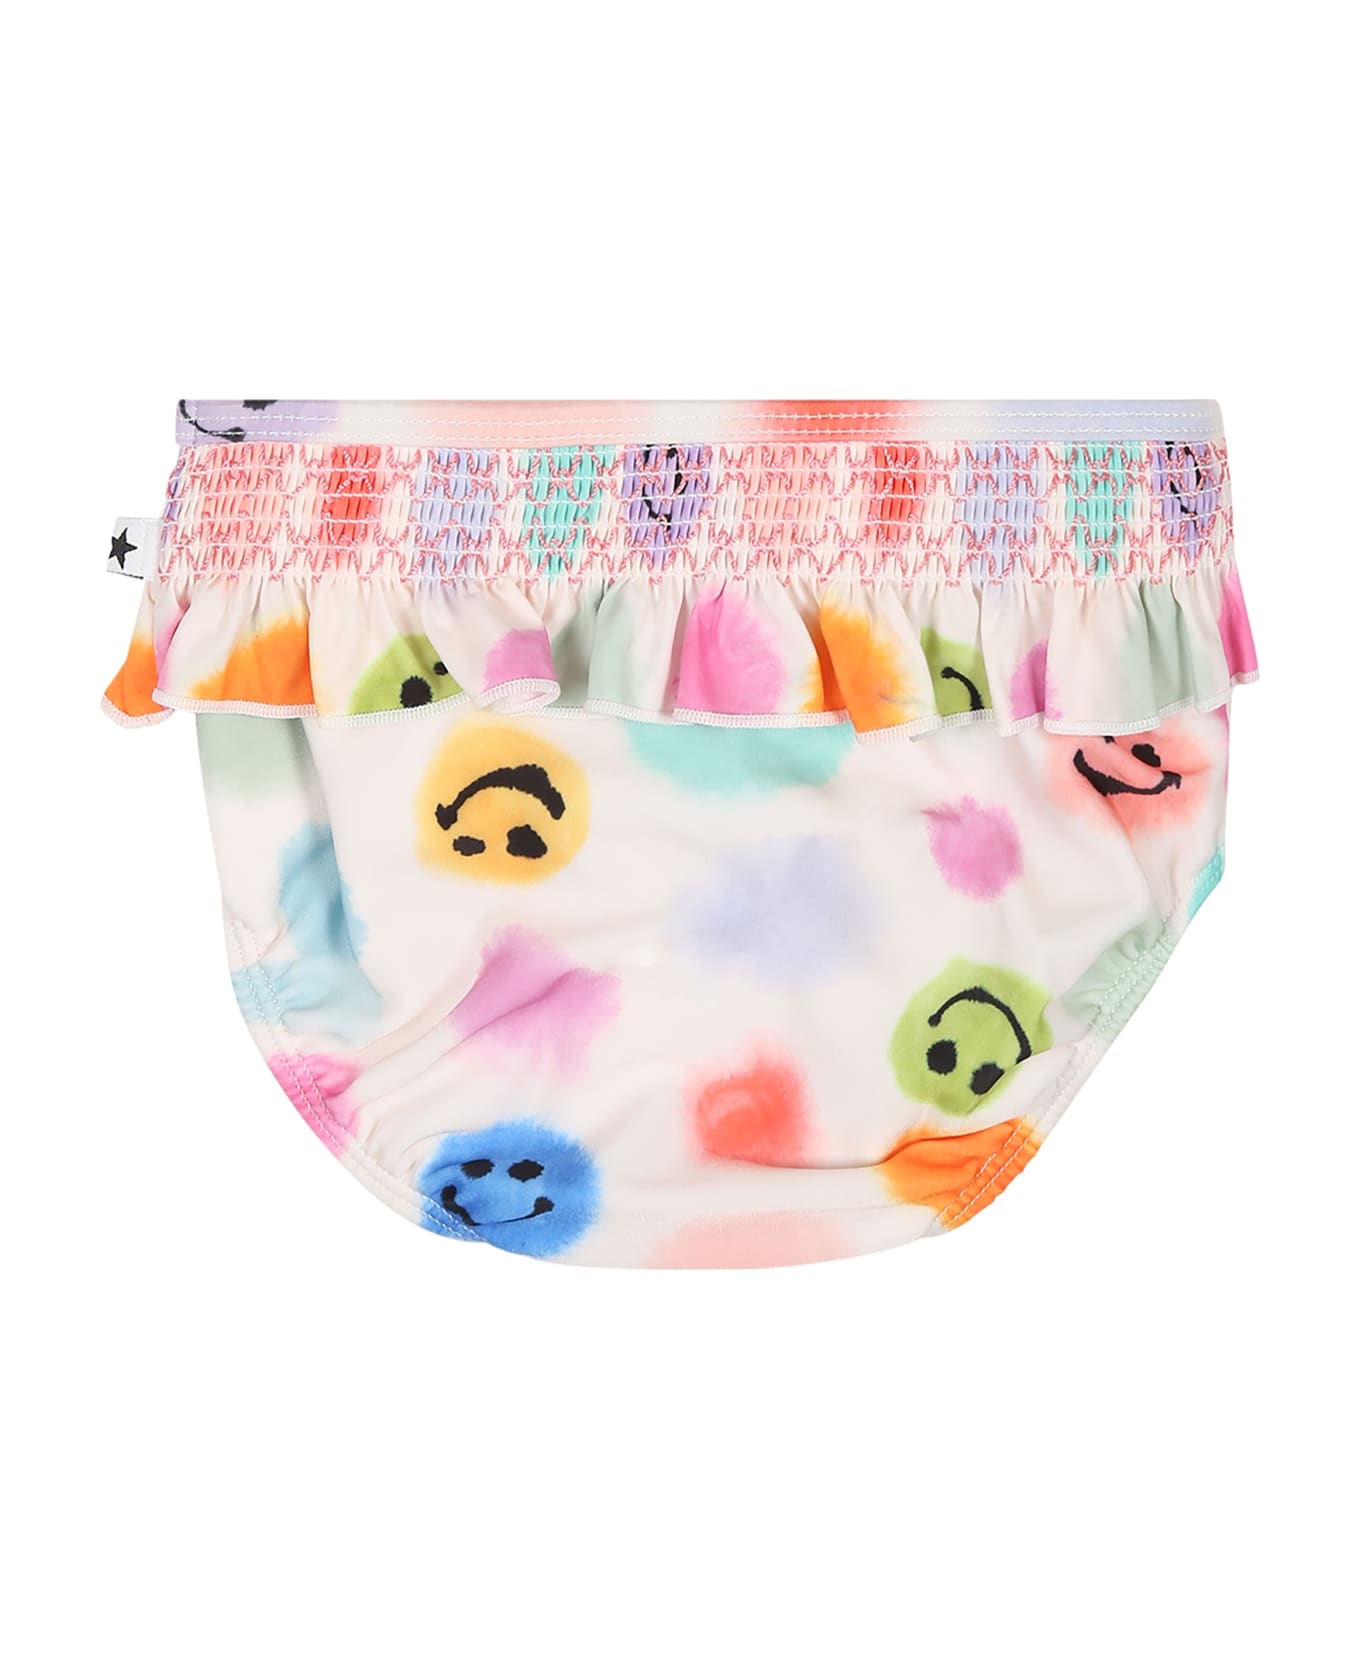 Molo White Swimbriefs For Baby Girl With Polka Dots And Smile - Multicolor